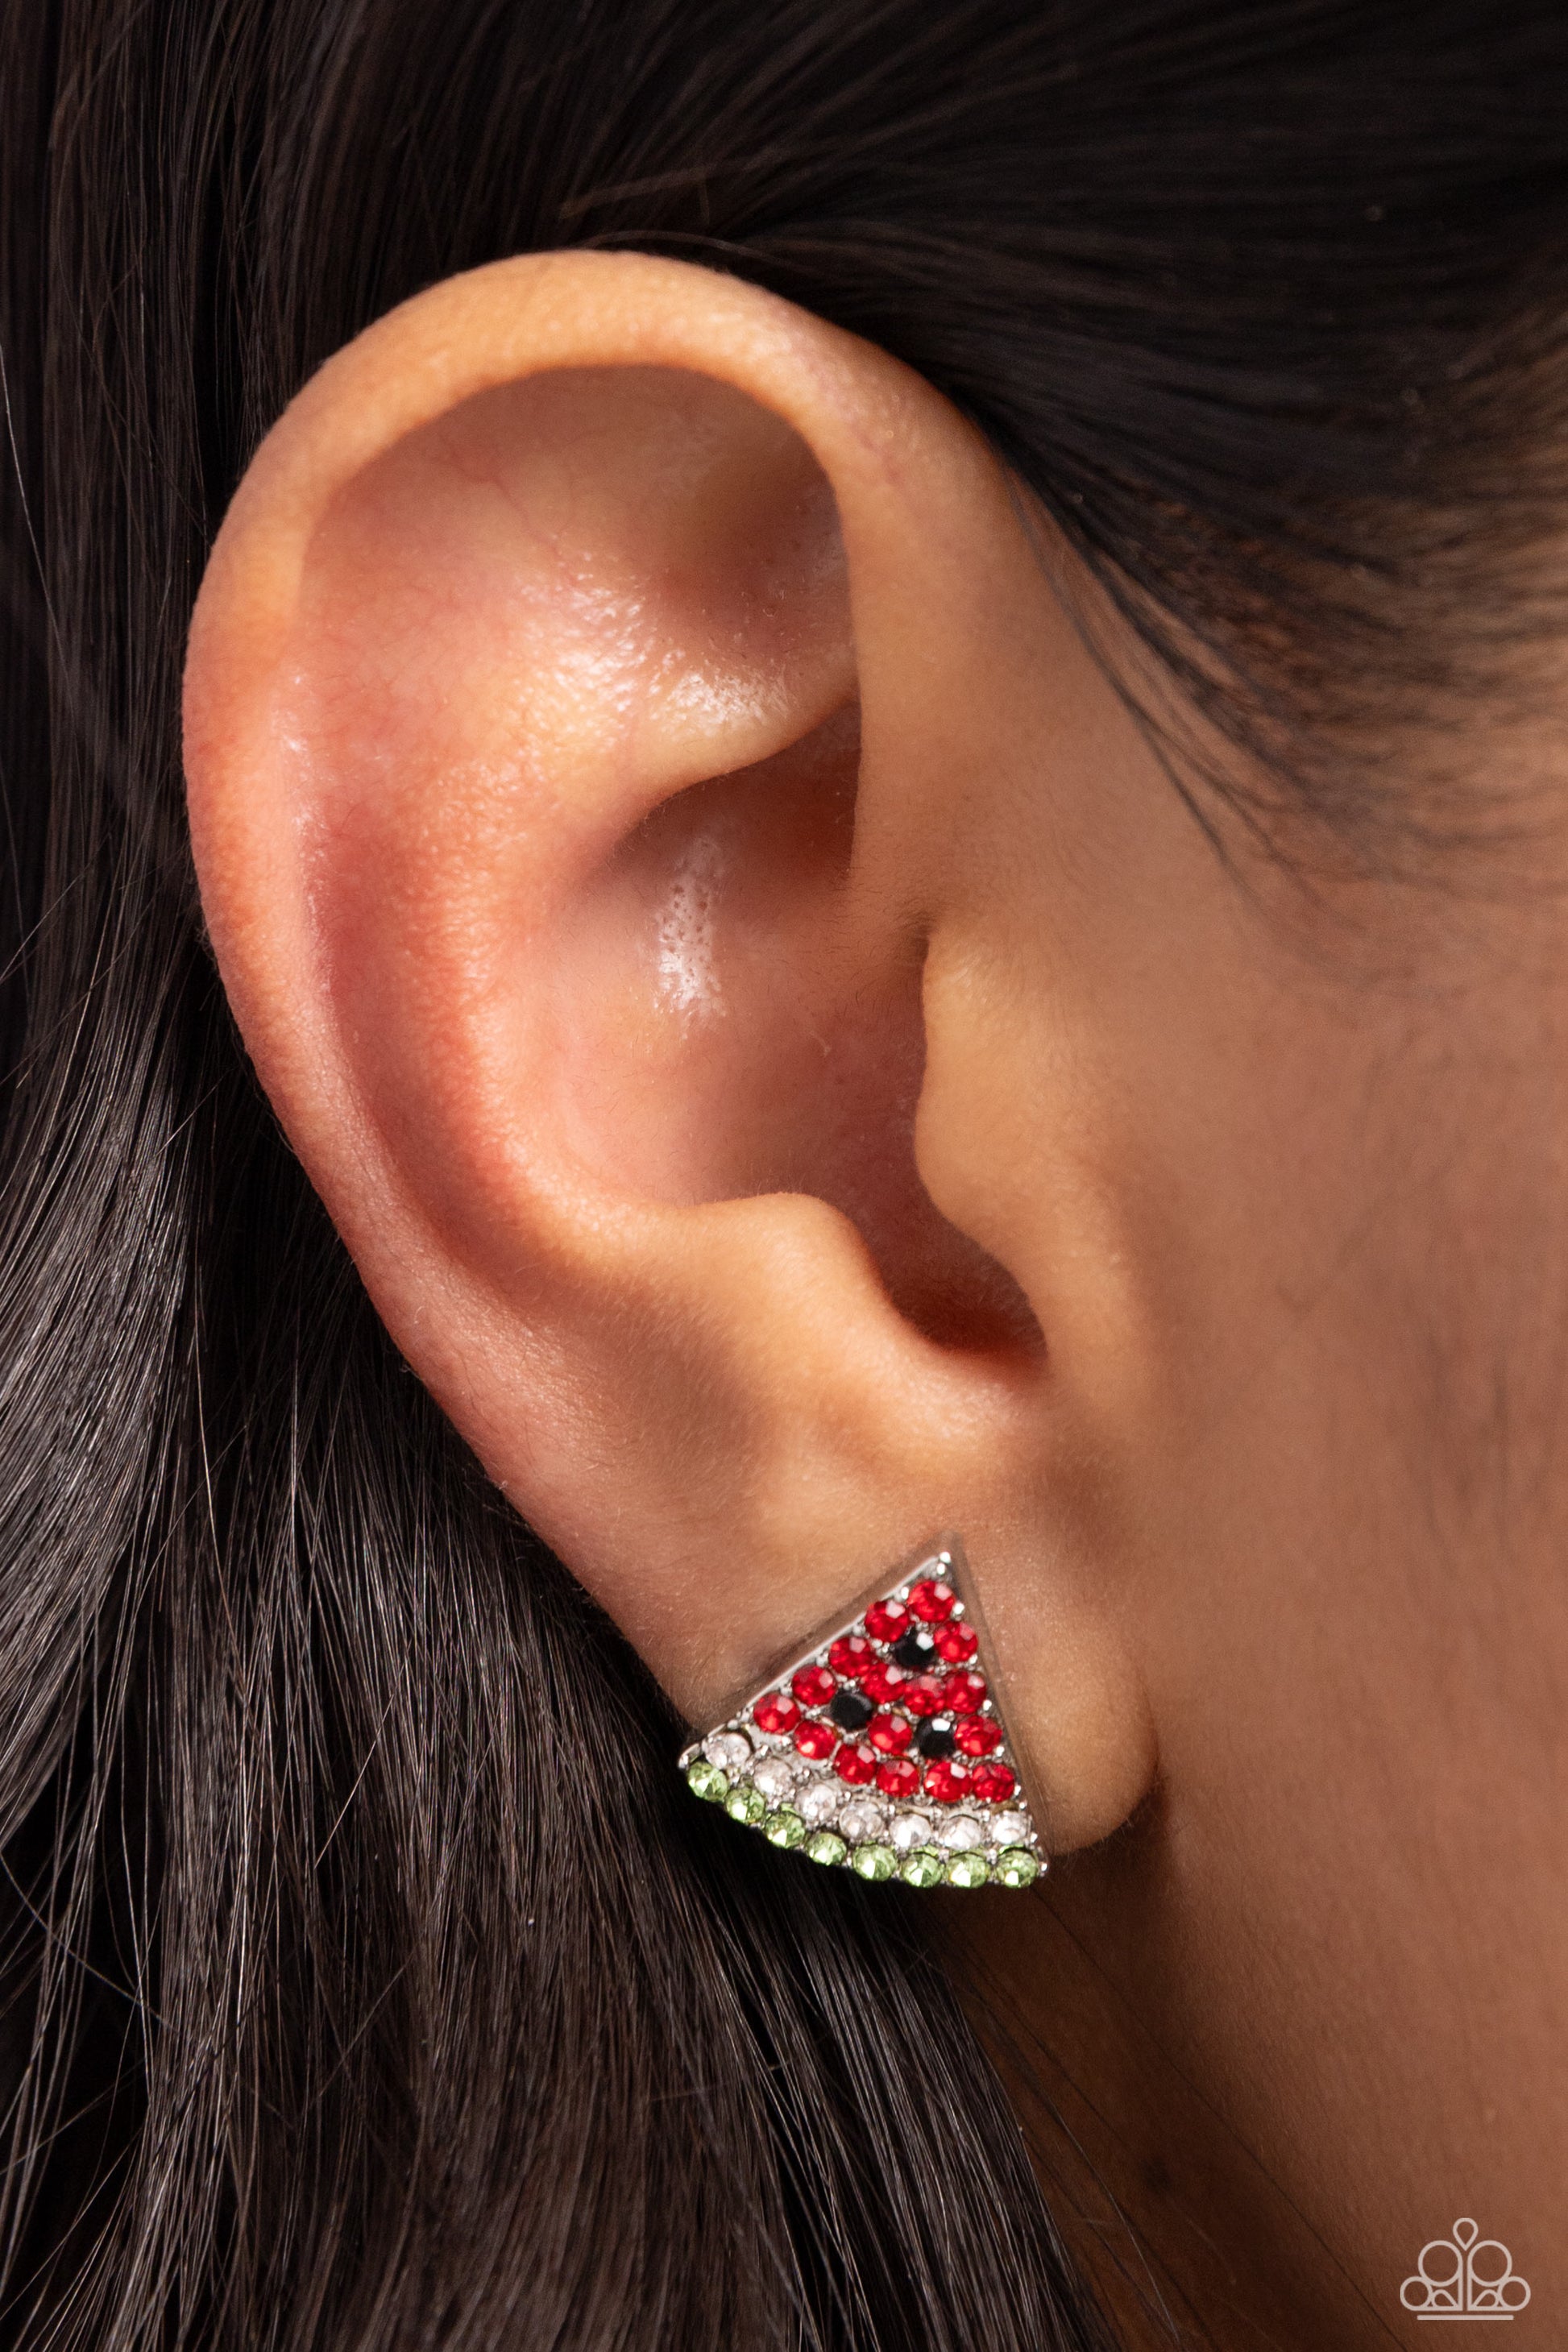 Watermelon Slice Red Post Earring - Paparazzi Accessories  Featuring red, black, white, and green rhinestones, a silver watermelon-inspired post glitters from the ear for a fresh, fruity design. Earring attaches to a standard post fitting. Sold as one pair of post earrings.  SKU: P5PO-RDXX-058XX